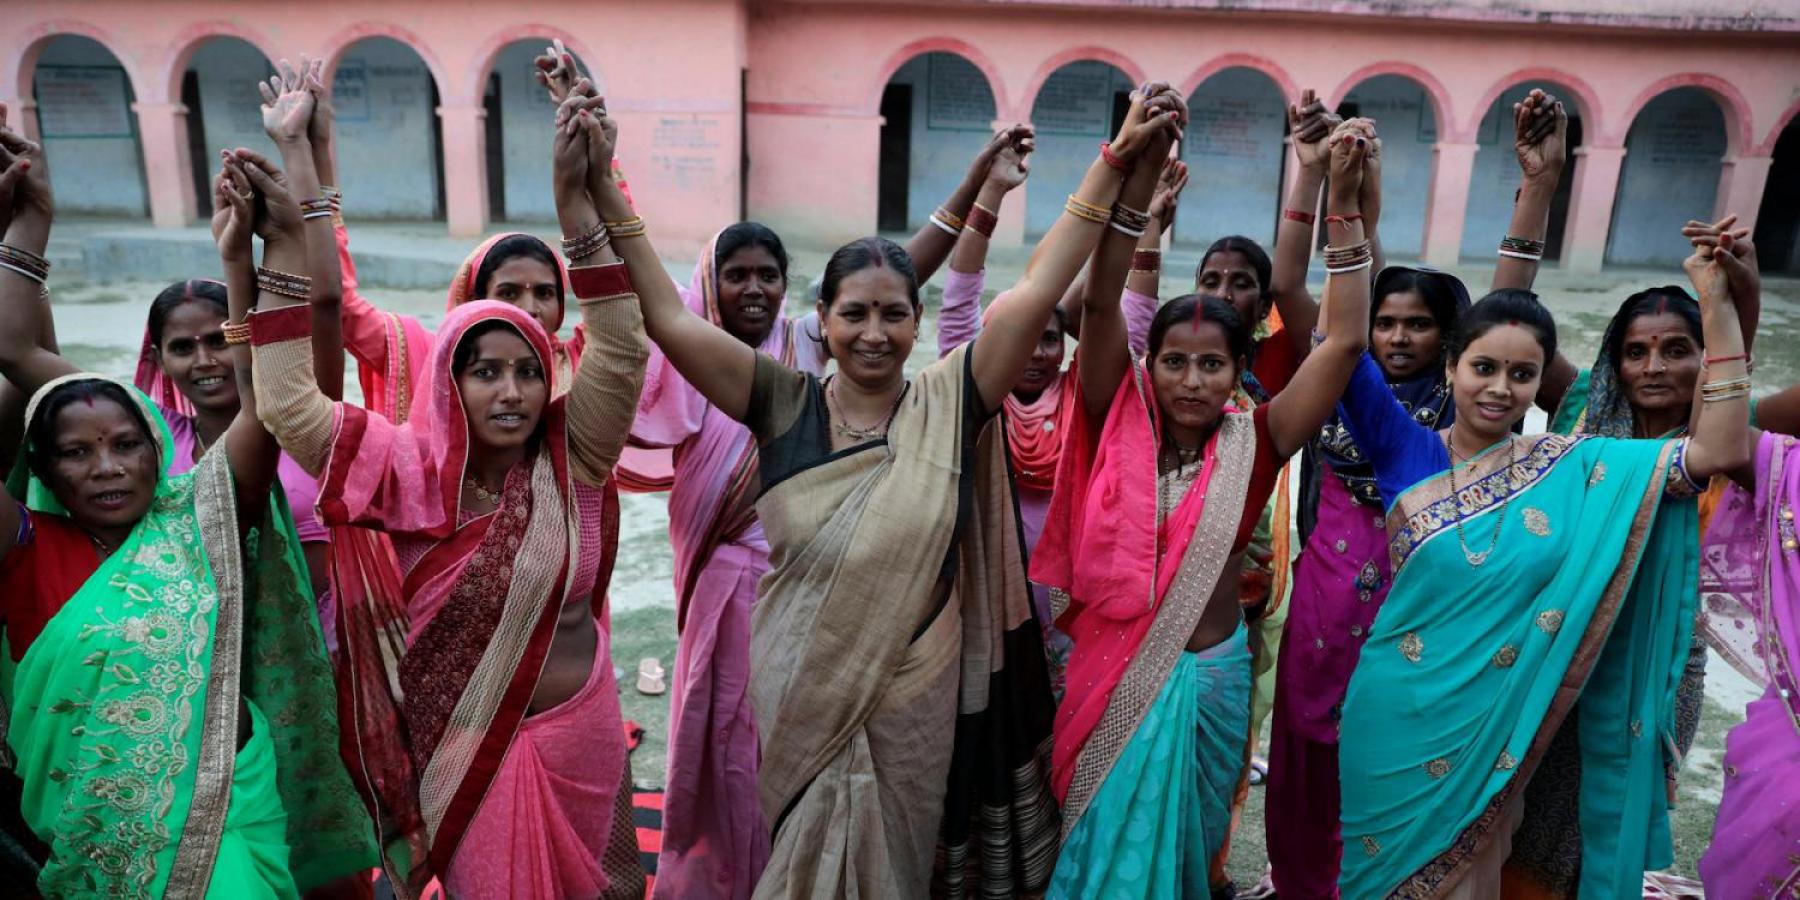 Elected Women Representatives in India hold their hands